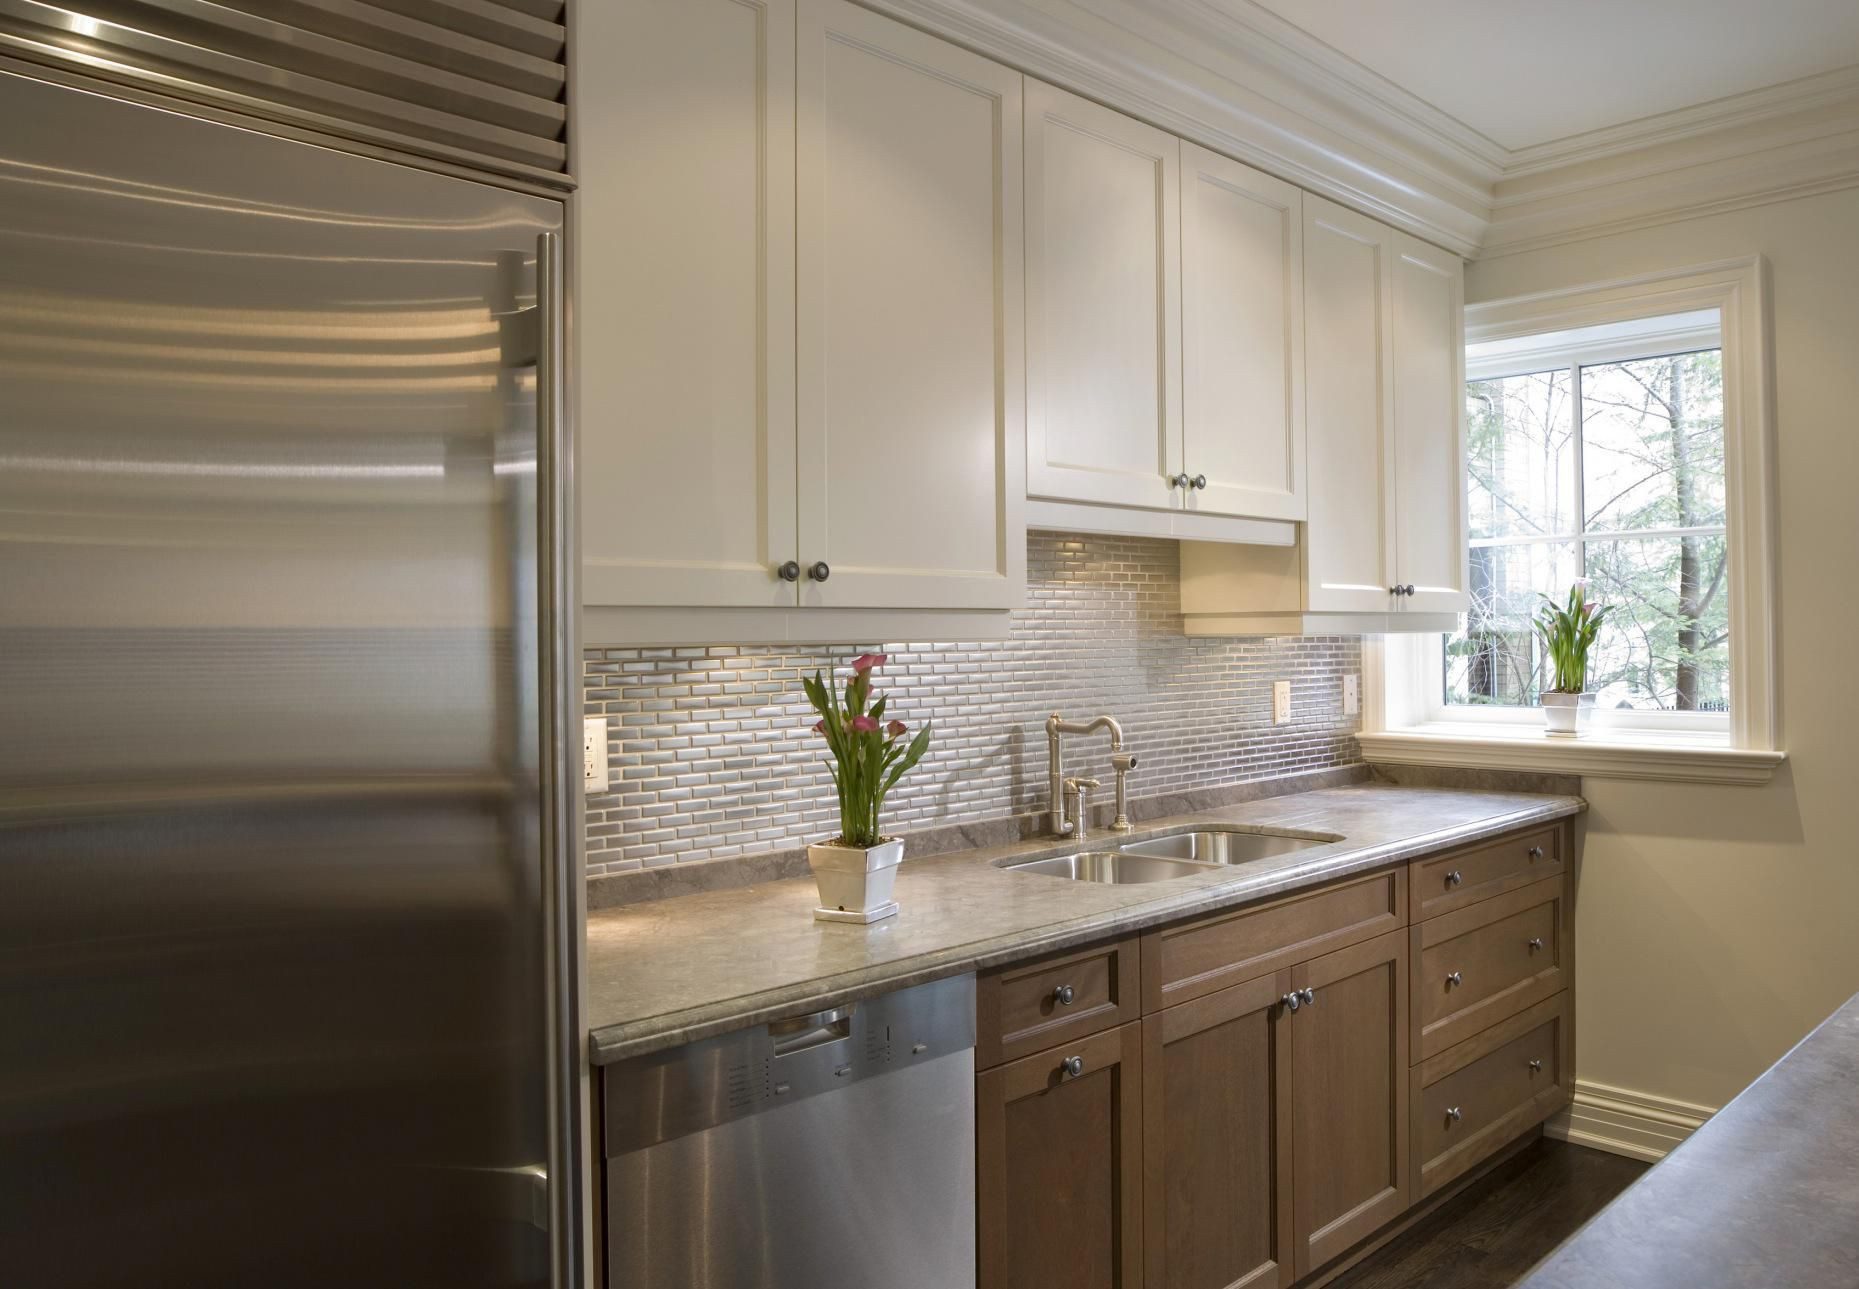 Remodeling A Small Kitchen
 Small Kitchen Remodeling Home Renovations